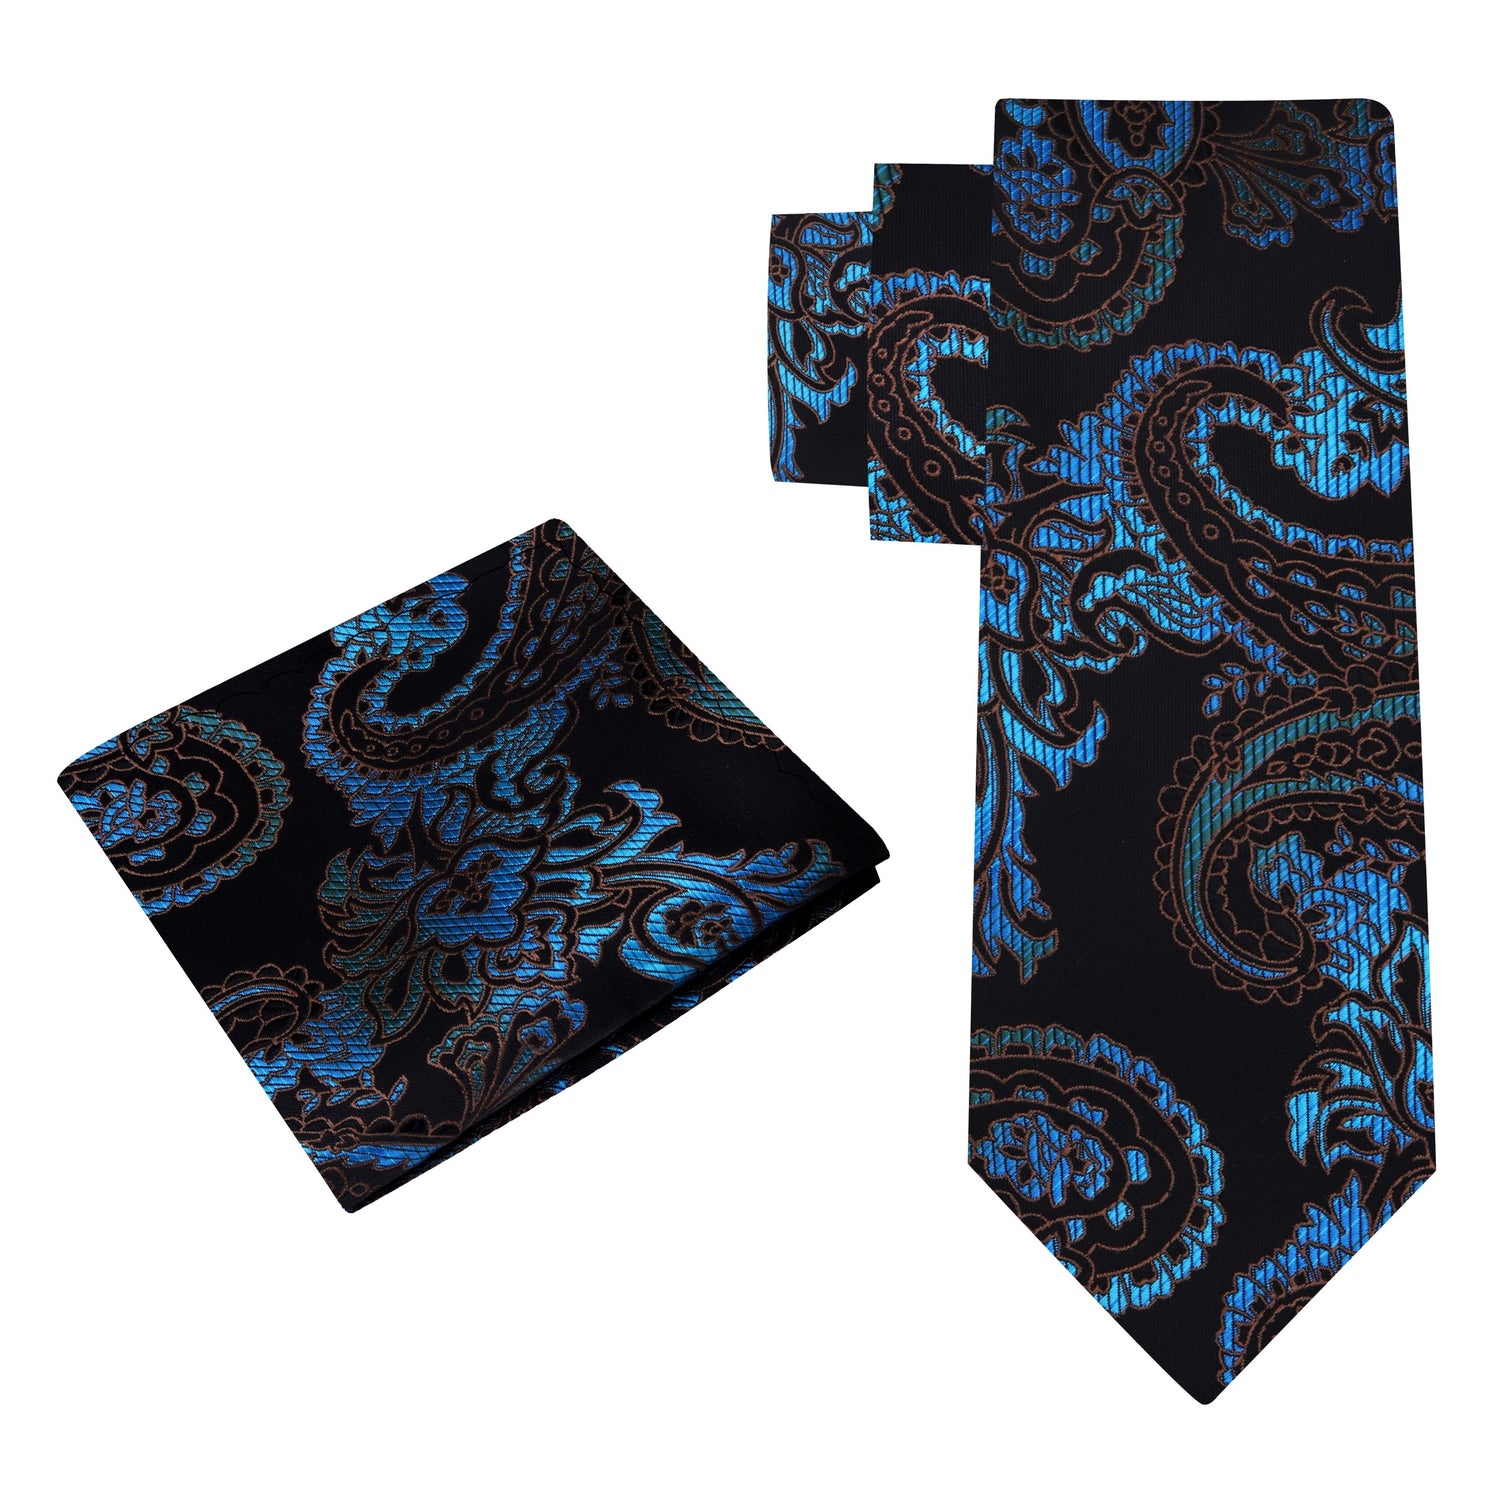 Alt View: Black, Teal Paisley Tie and Pocket Square